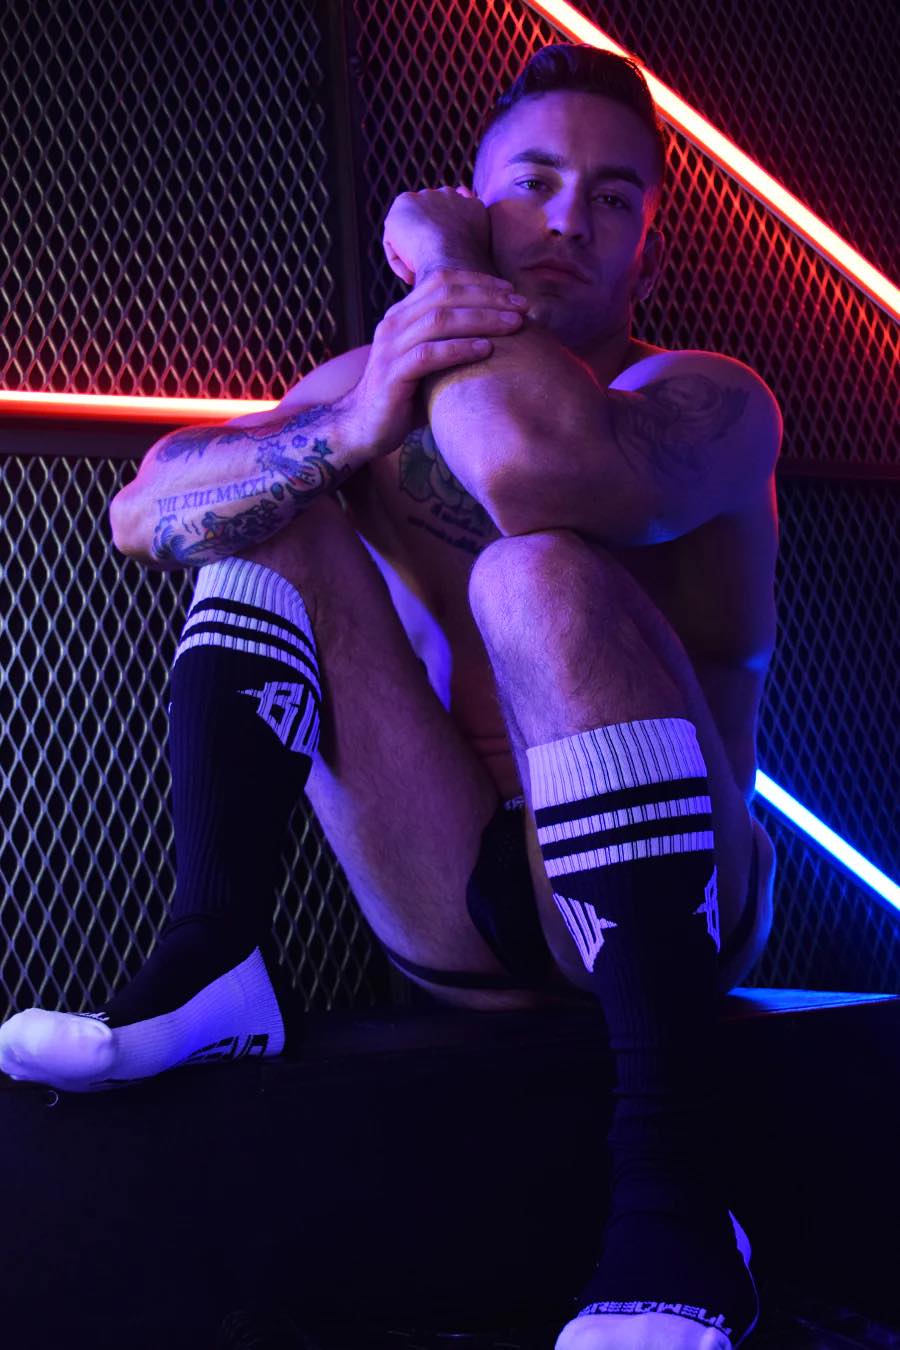 A model in a jock strap sitting in front of a fence with neon lights wearing the black Hex Socks.